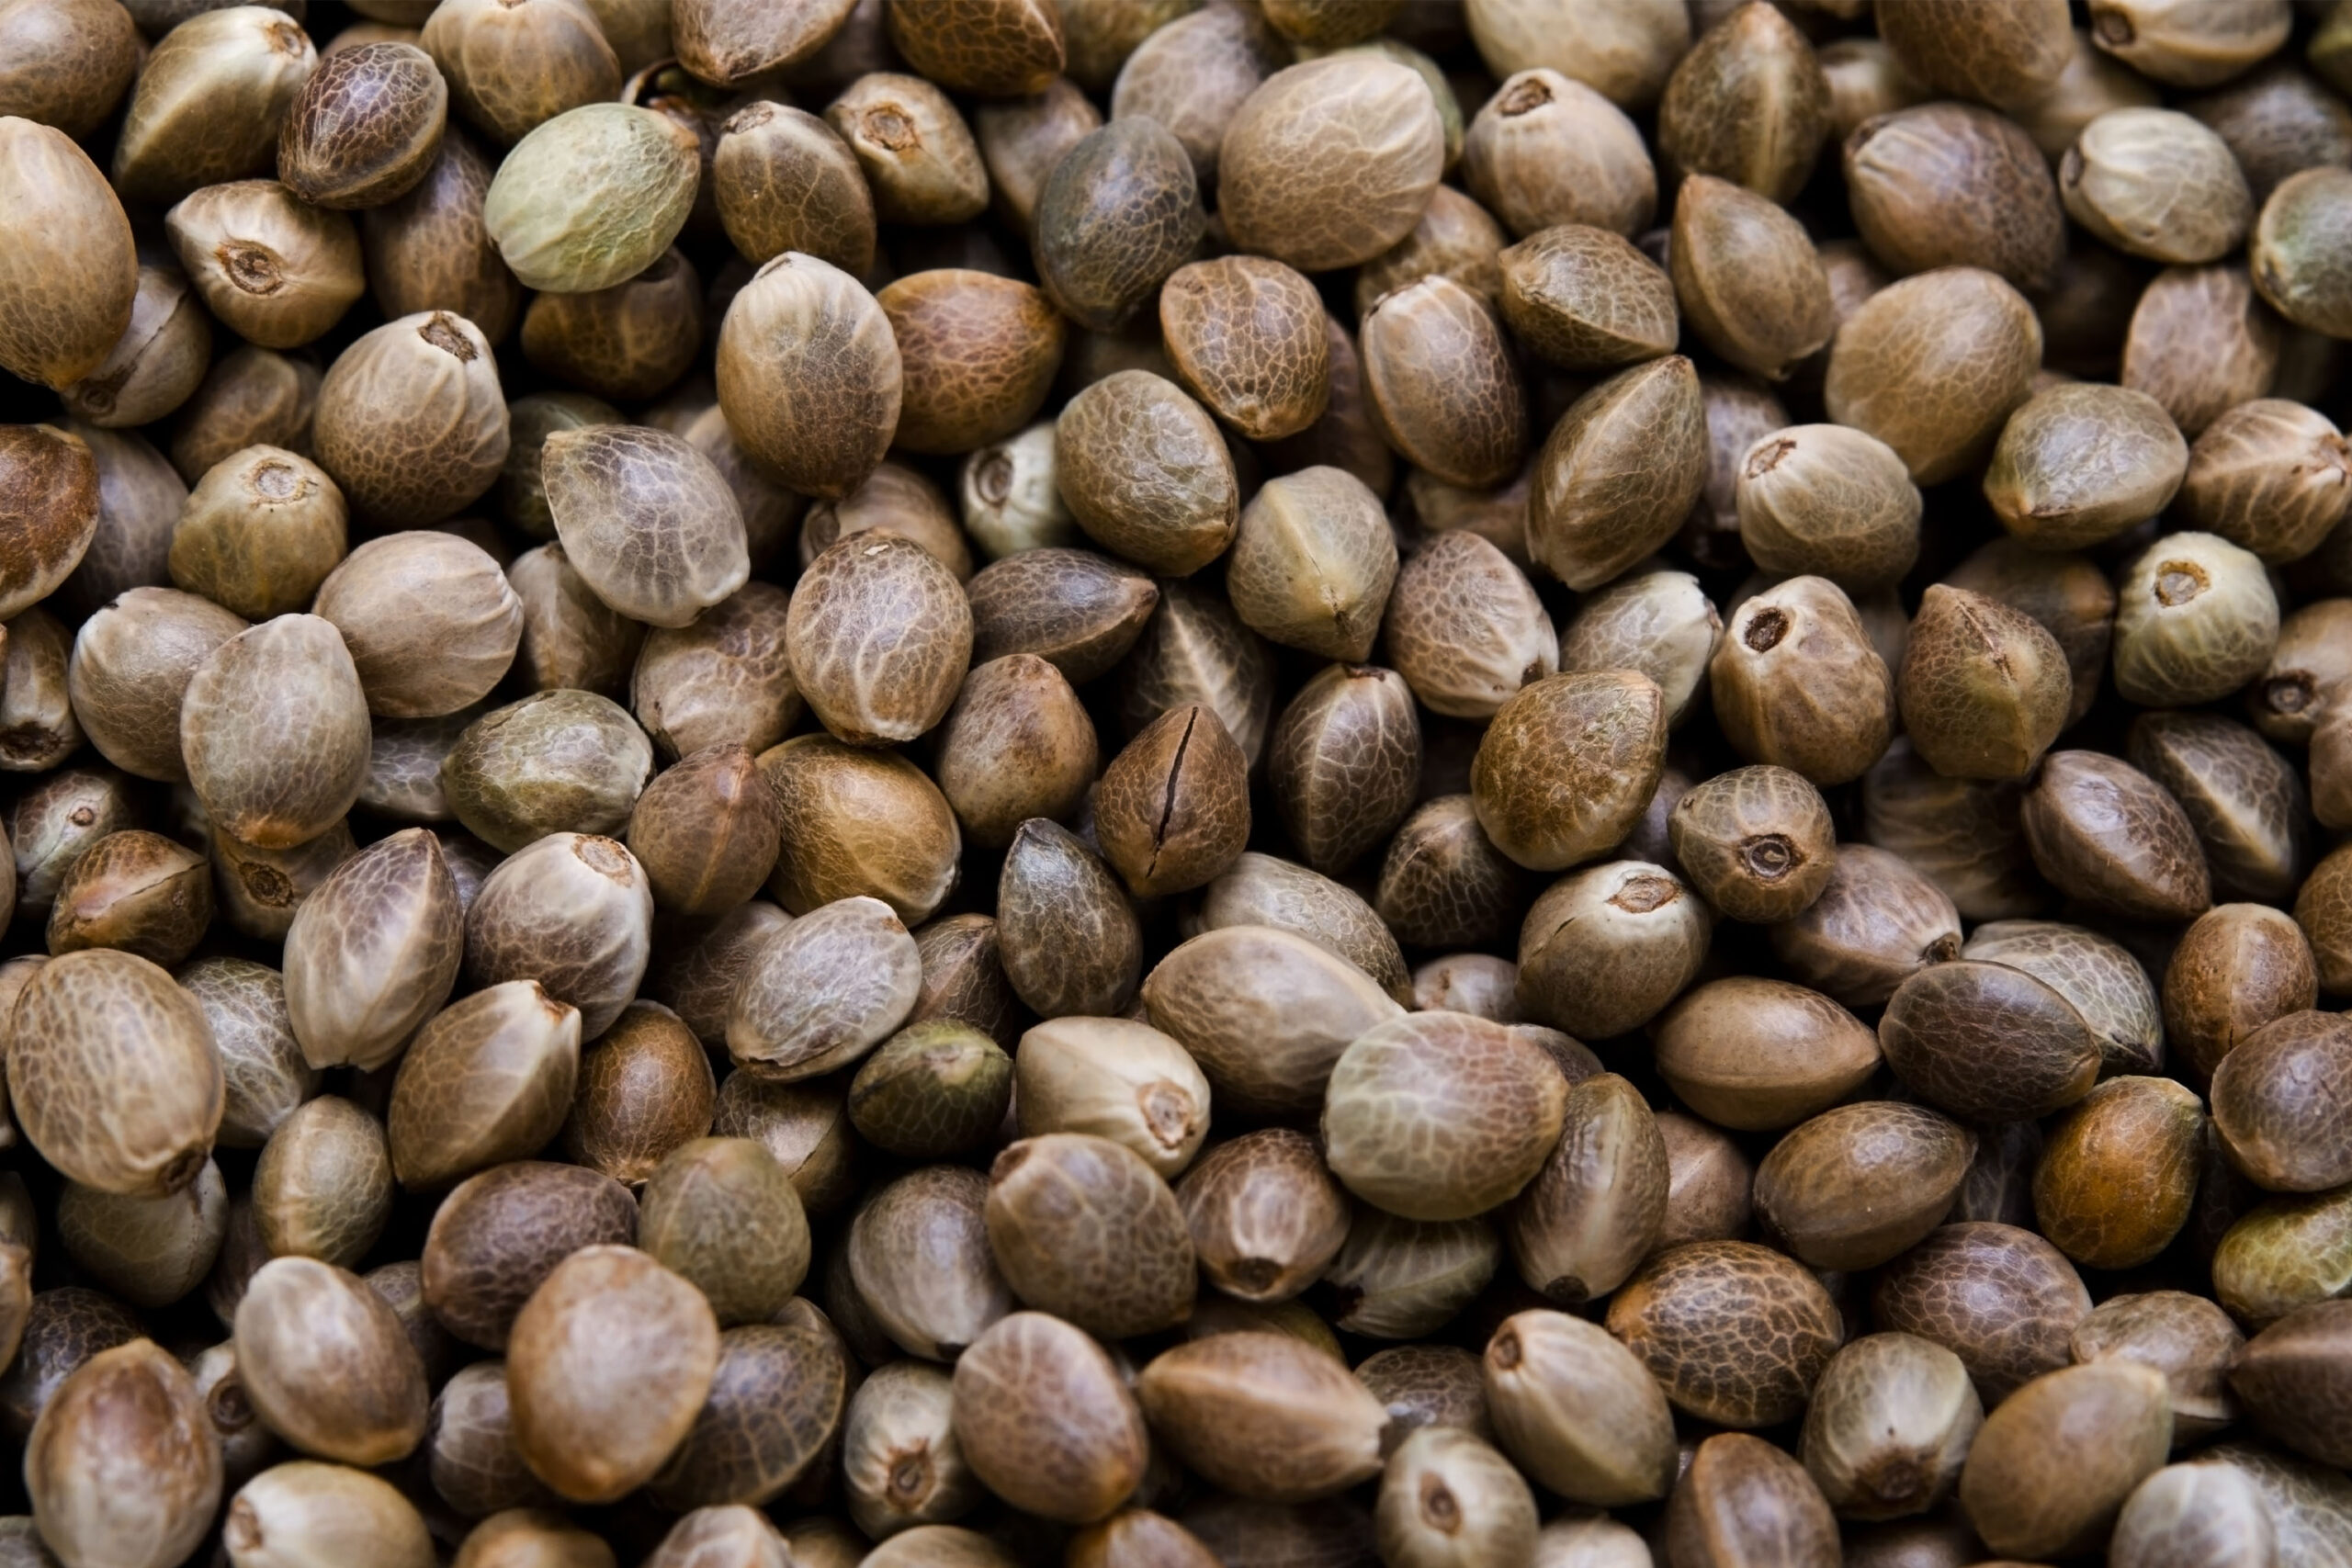 Not All Hemp Seeds Are Equal